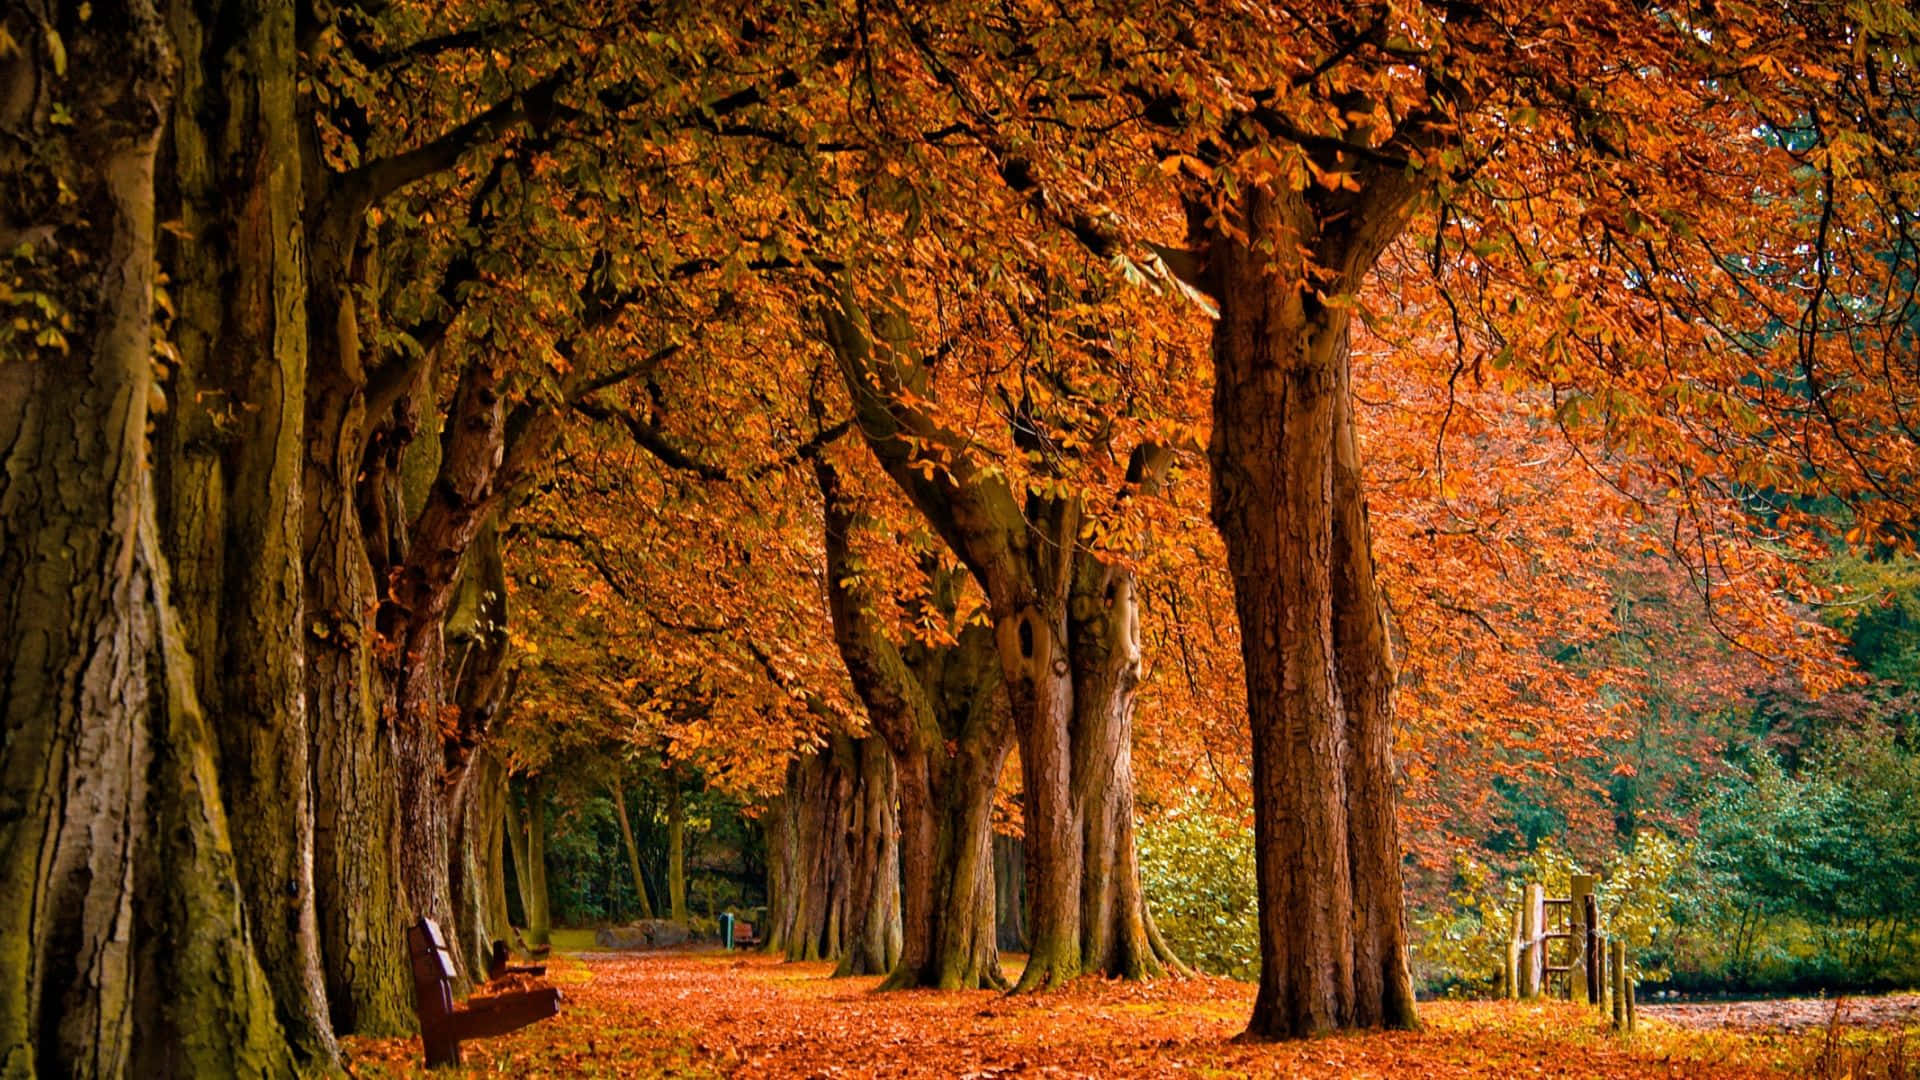 Enjoy the colors of Fall in this beautiful autumn scene Wallpaper